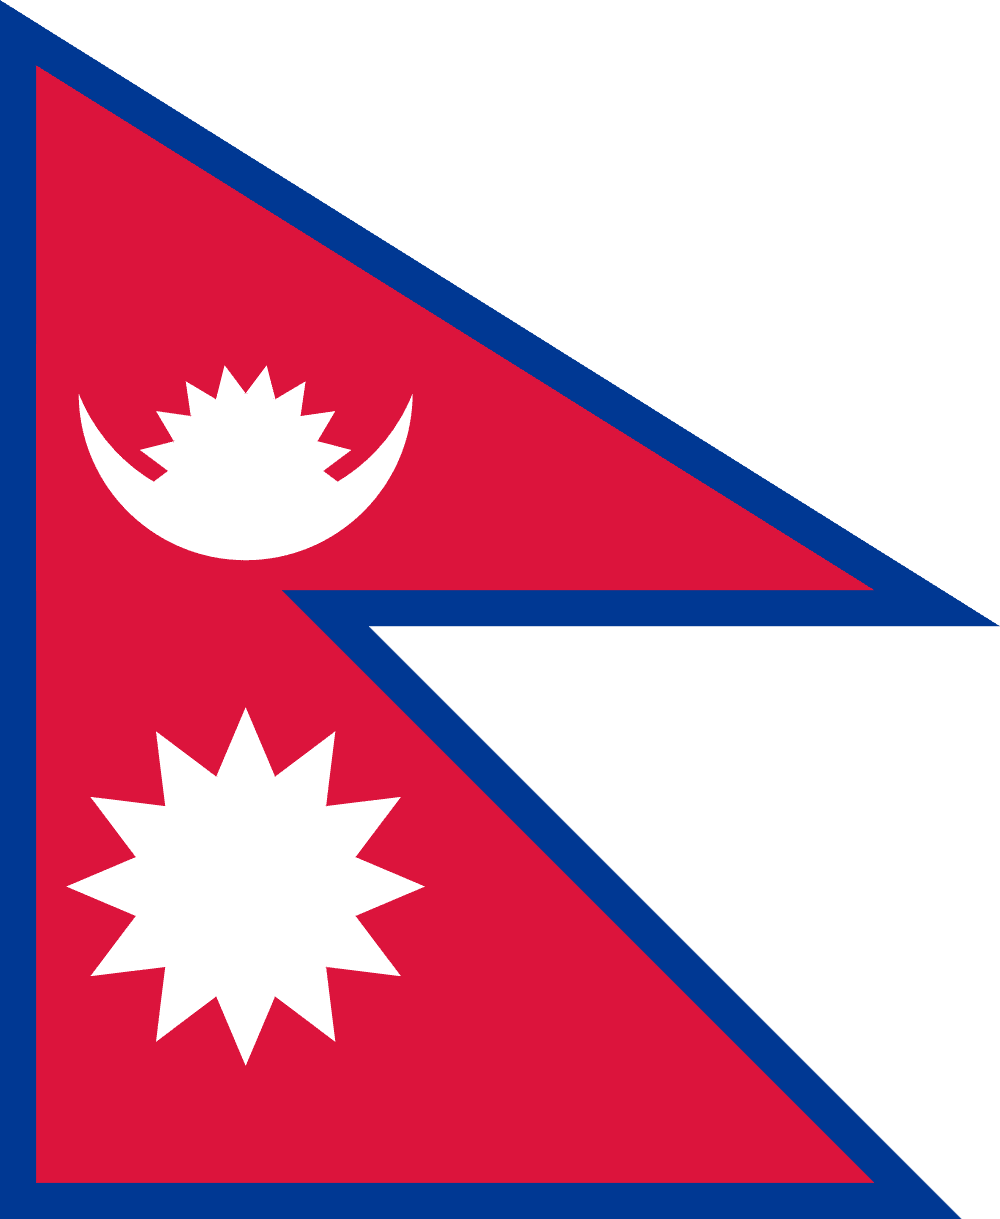 Nepal_flag_colored